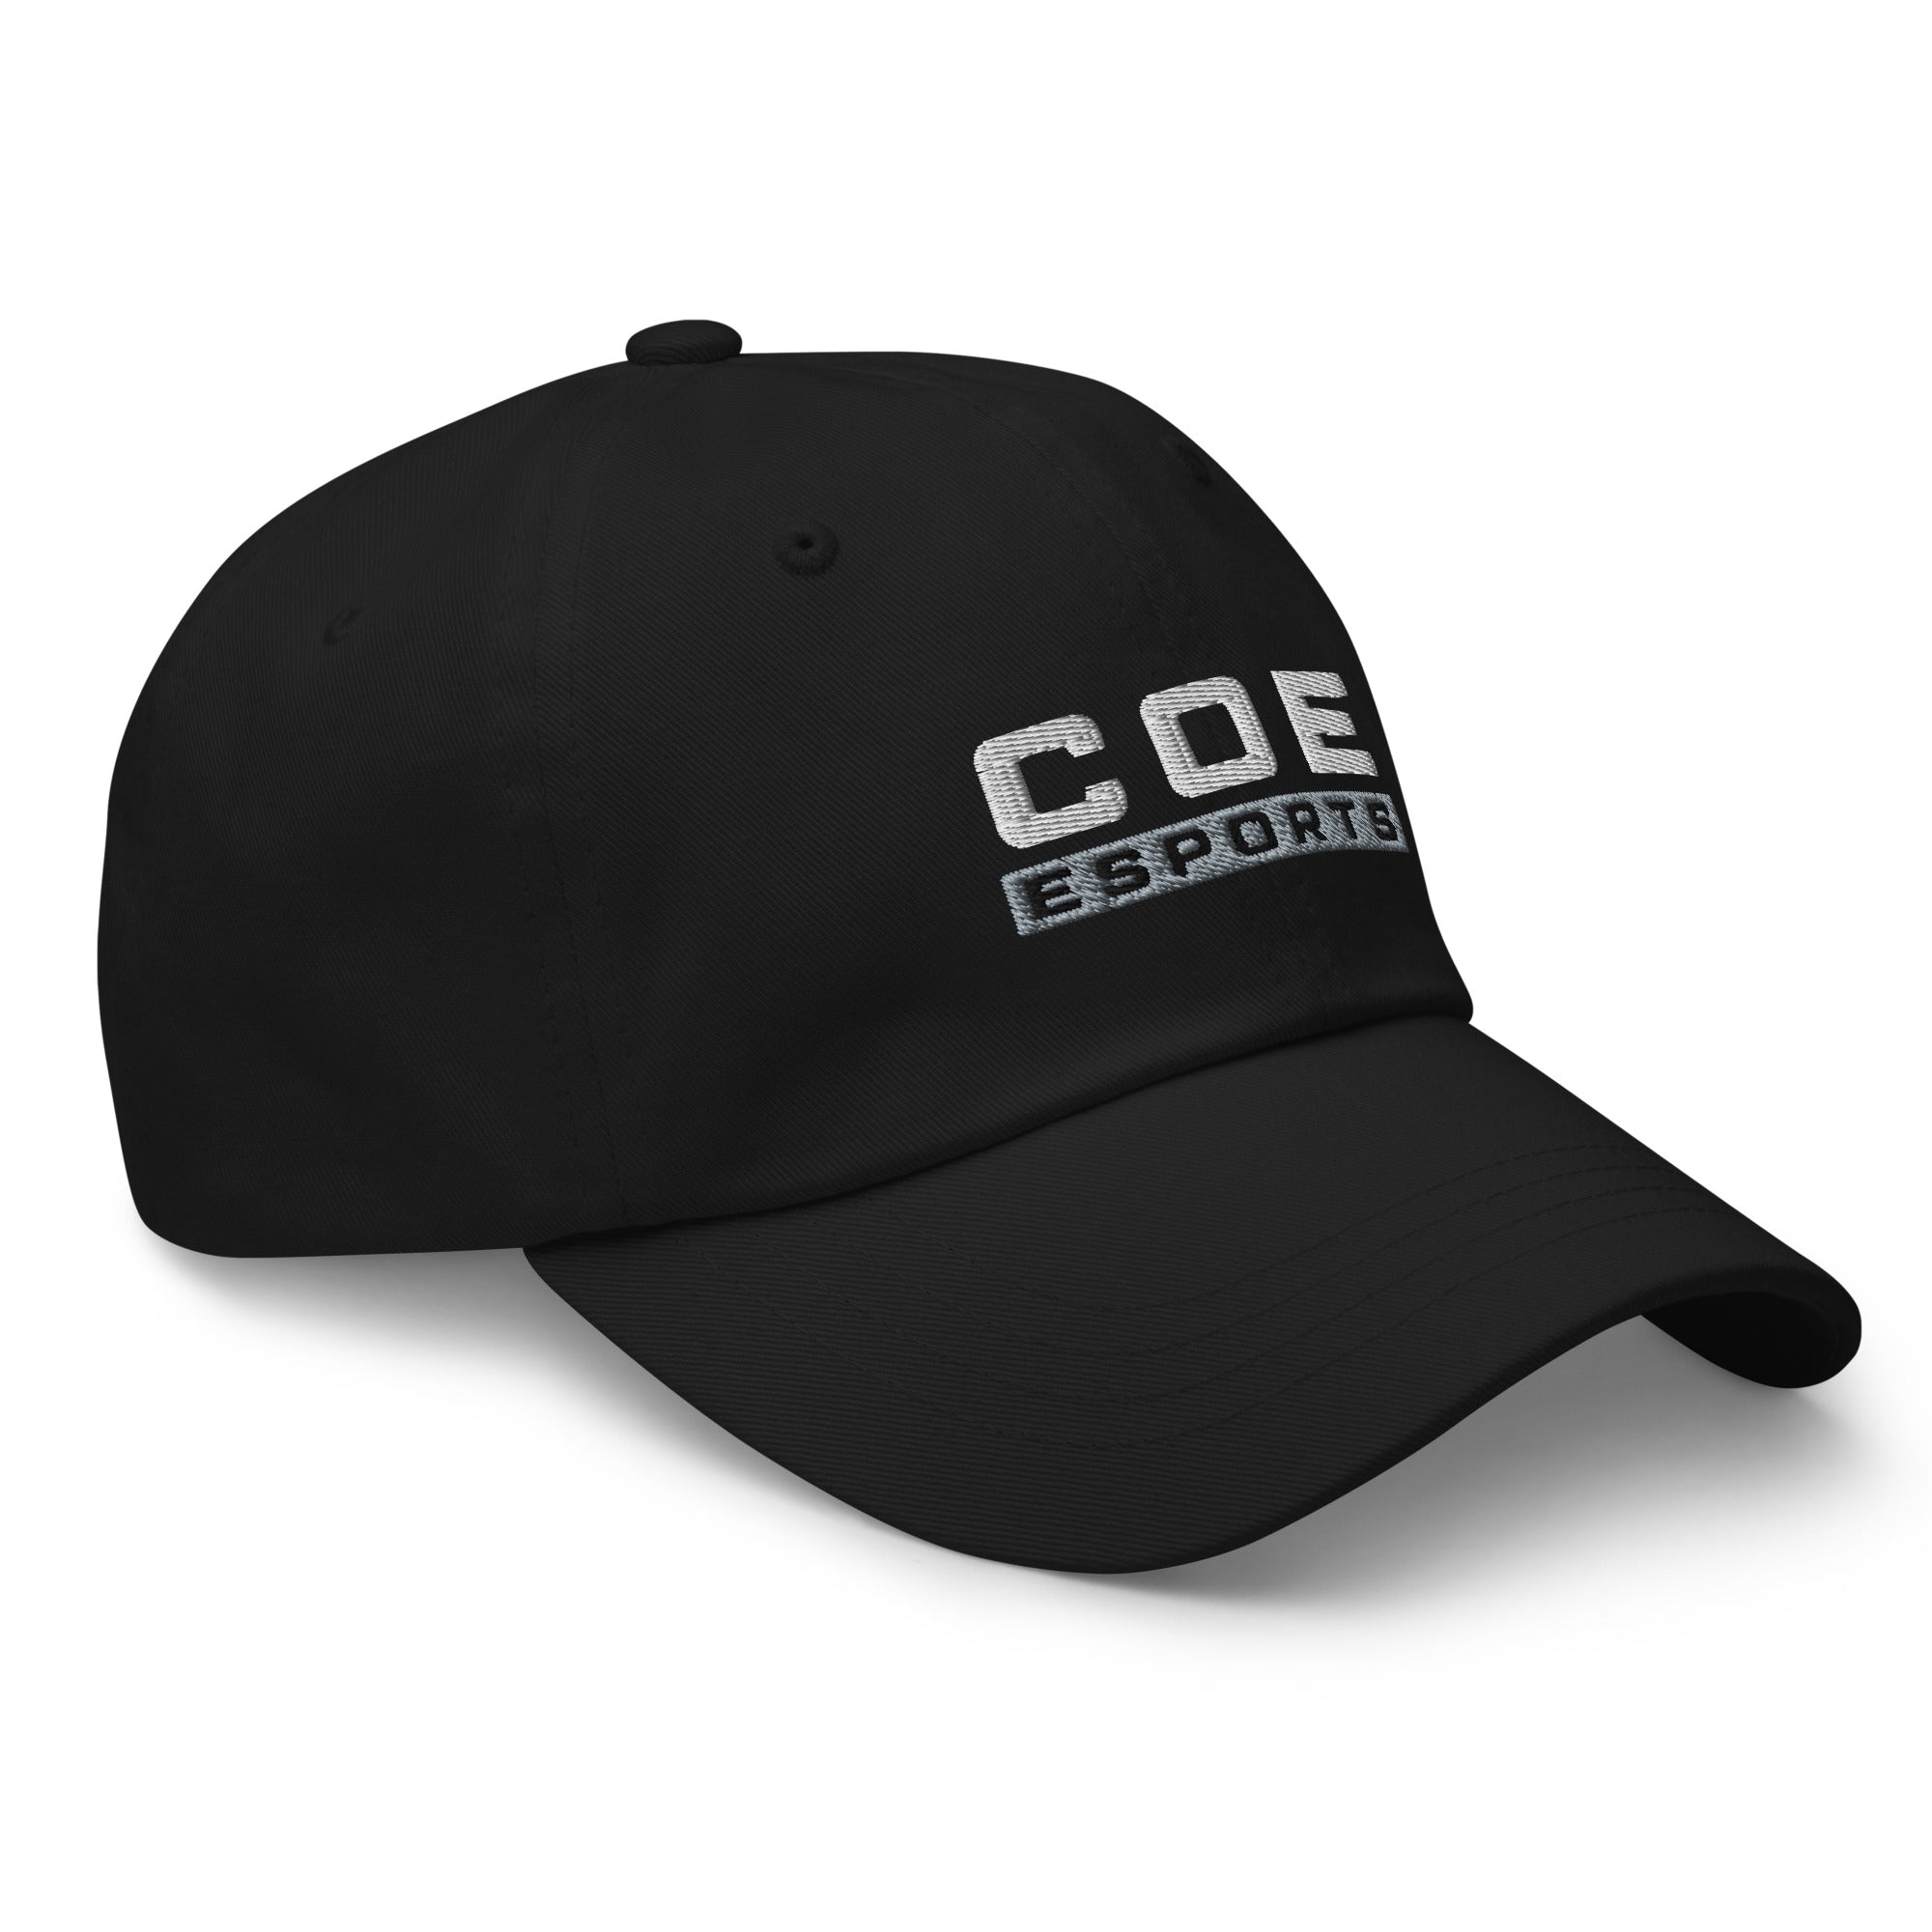 Coe College | On Demand | Embroidered Dad Hat